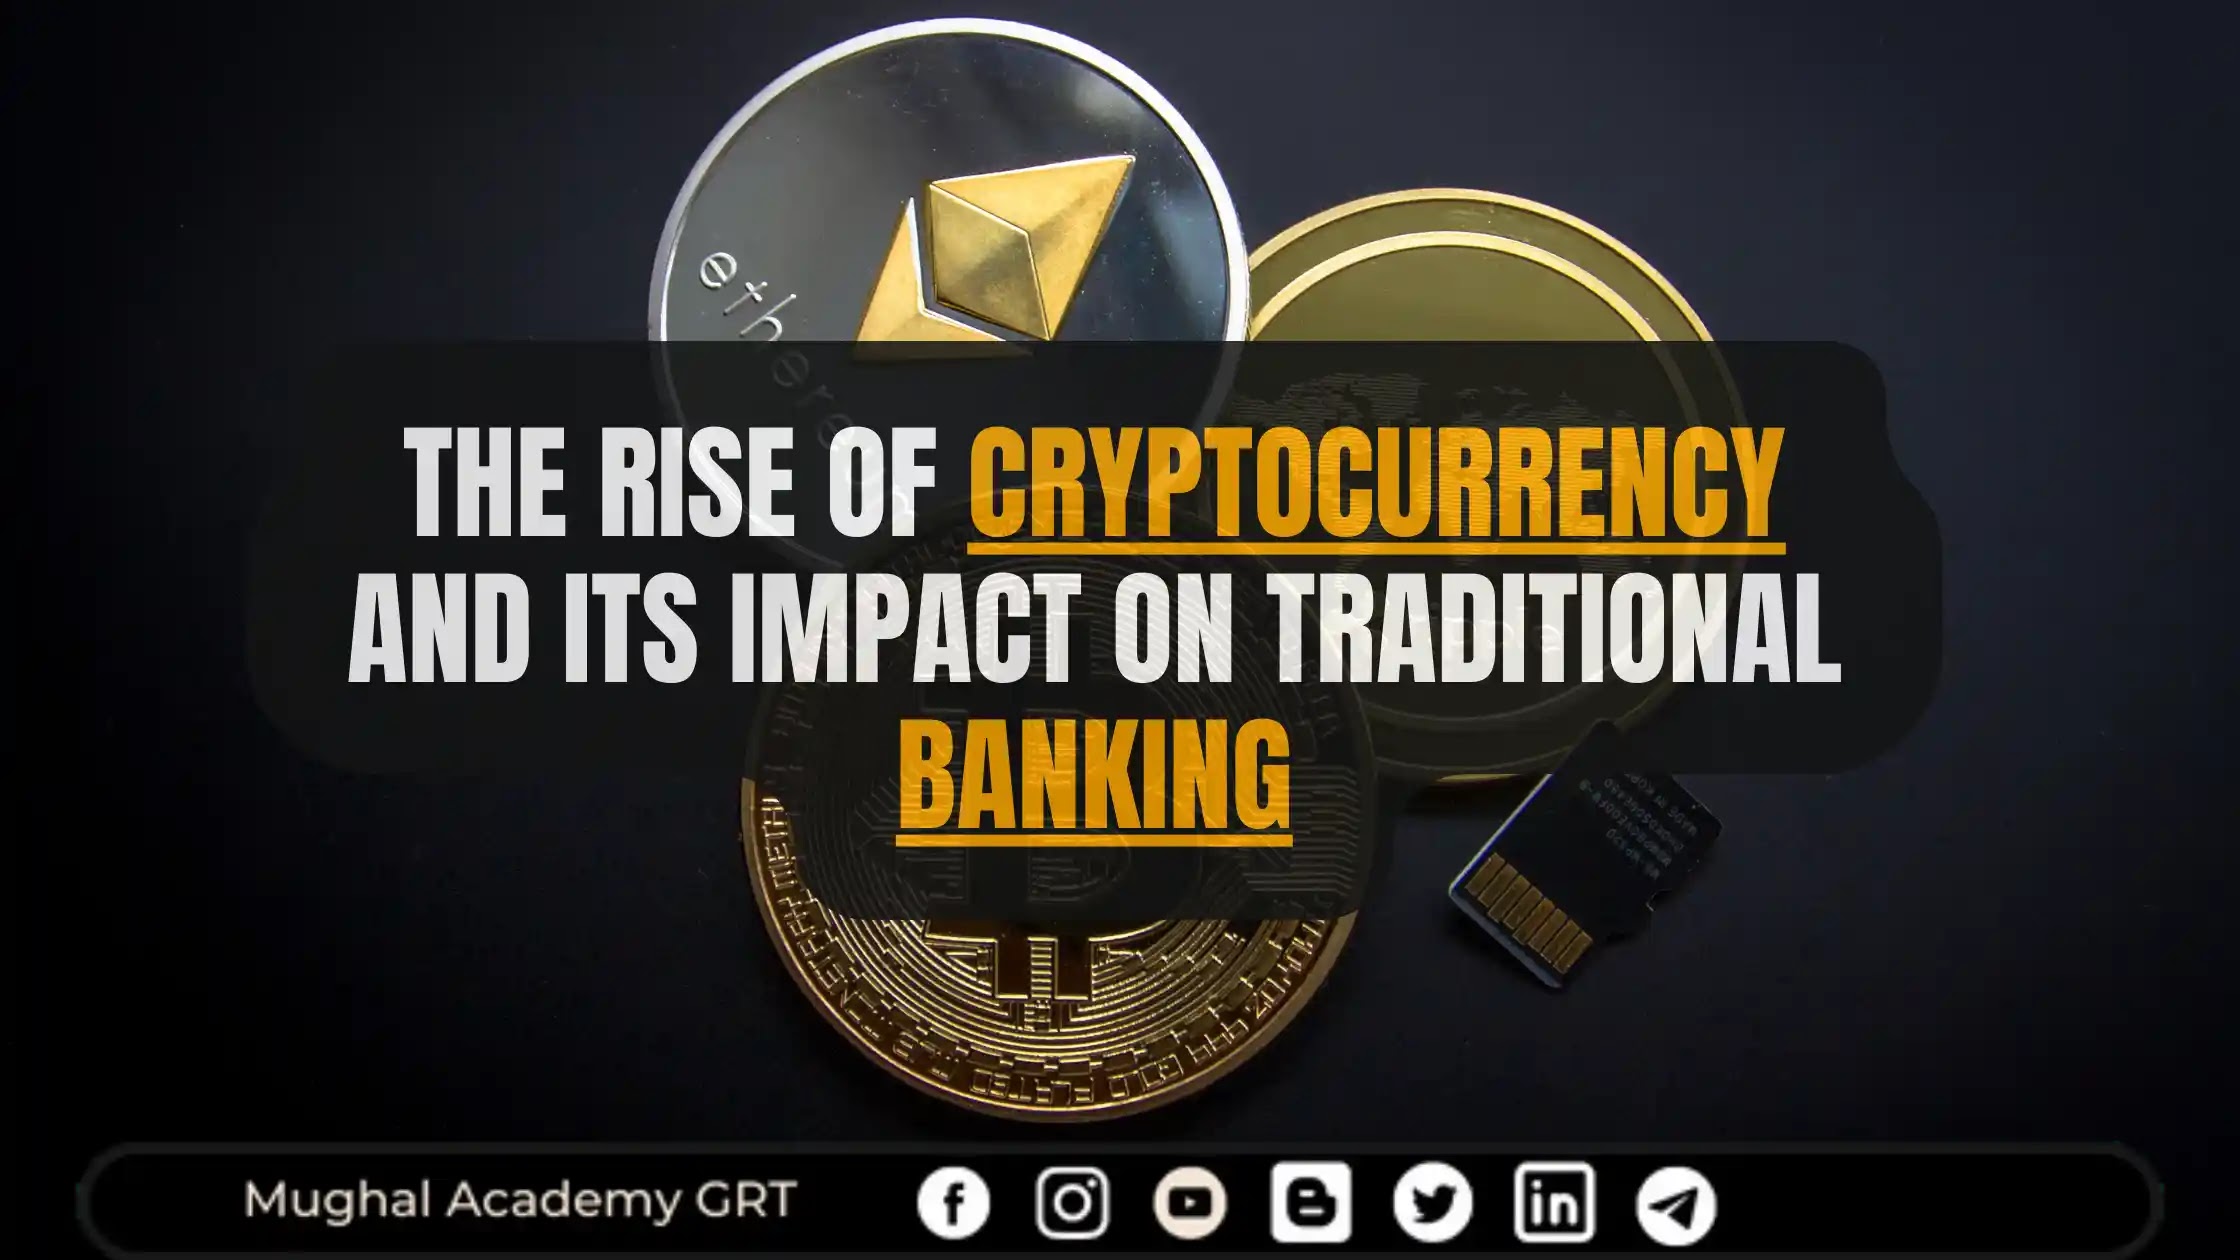 The Rise of Cryptocurrency and Its Impact on Traditional Banking